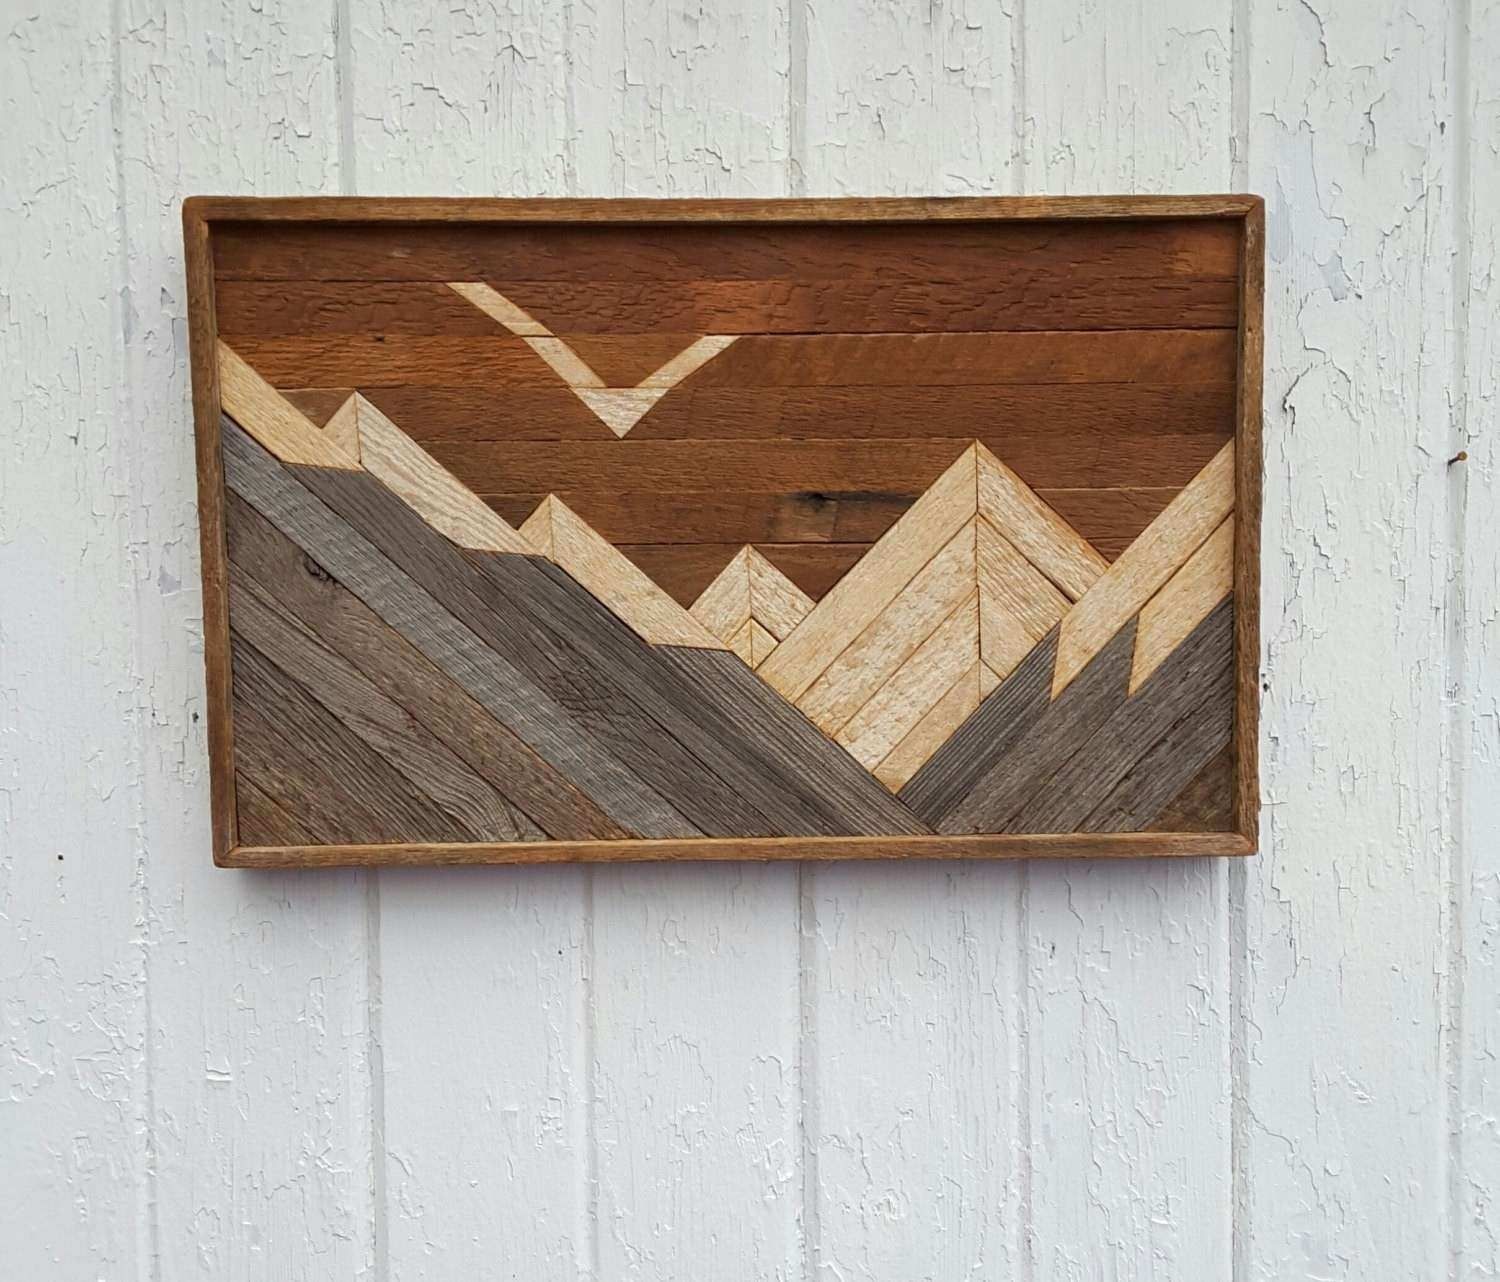 Wood Plank Wall Decor Best Of Reclaimed Wood Wall Art Mountains Pertaining To Plank Wall Art (View 6 of 20)